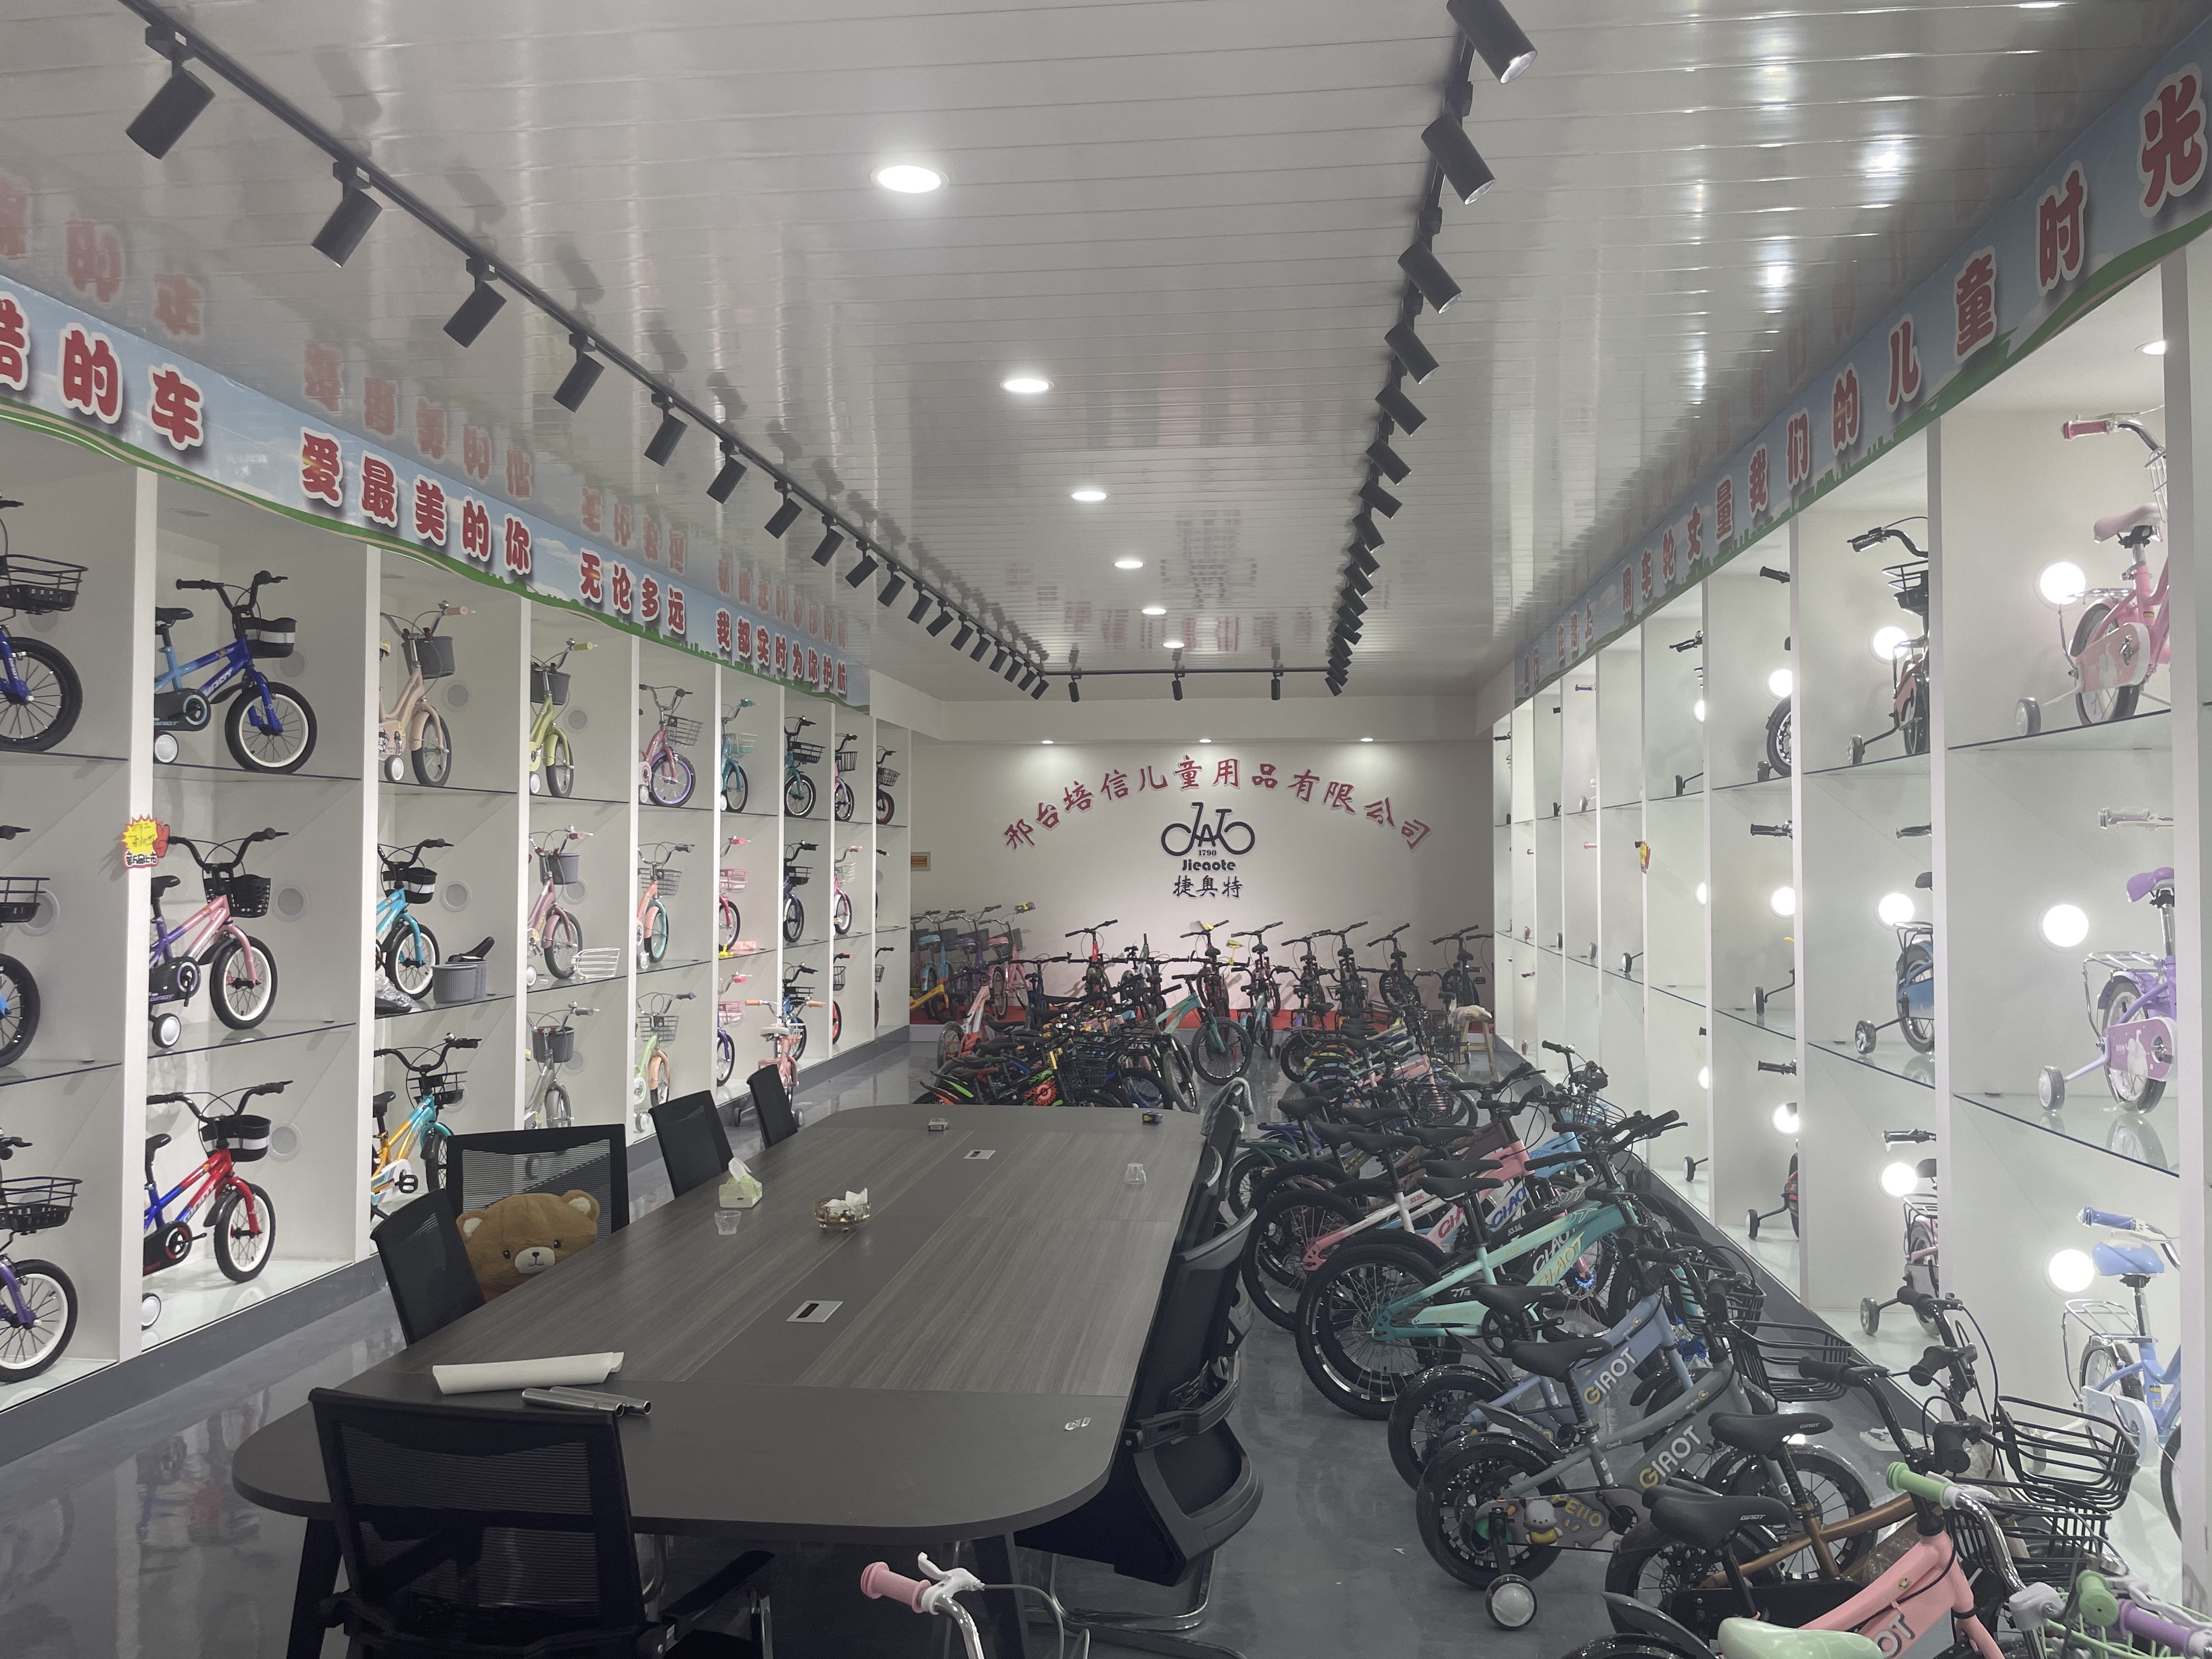 Hebei Giaot Bike Factory: Creating a Better Future for Children’s Bikes